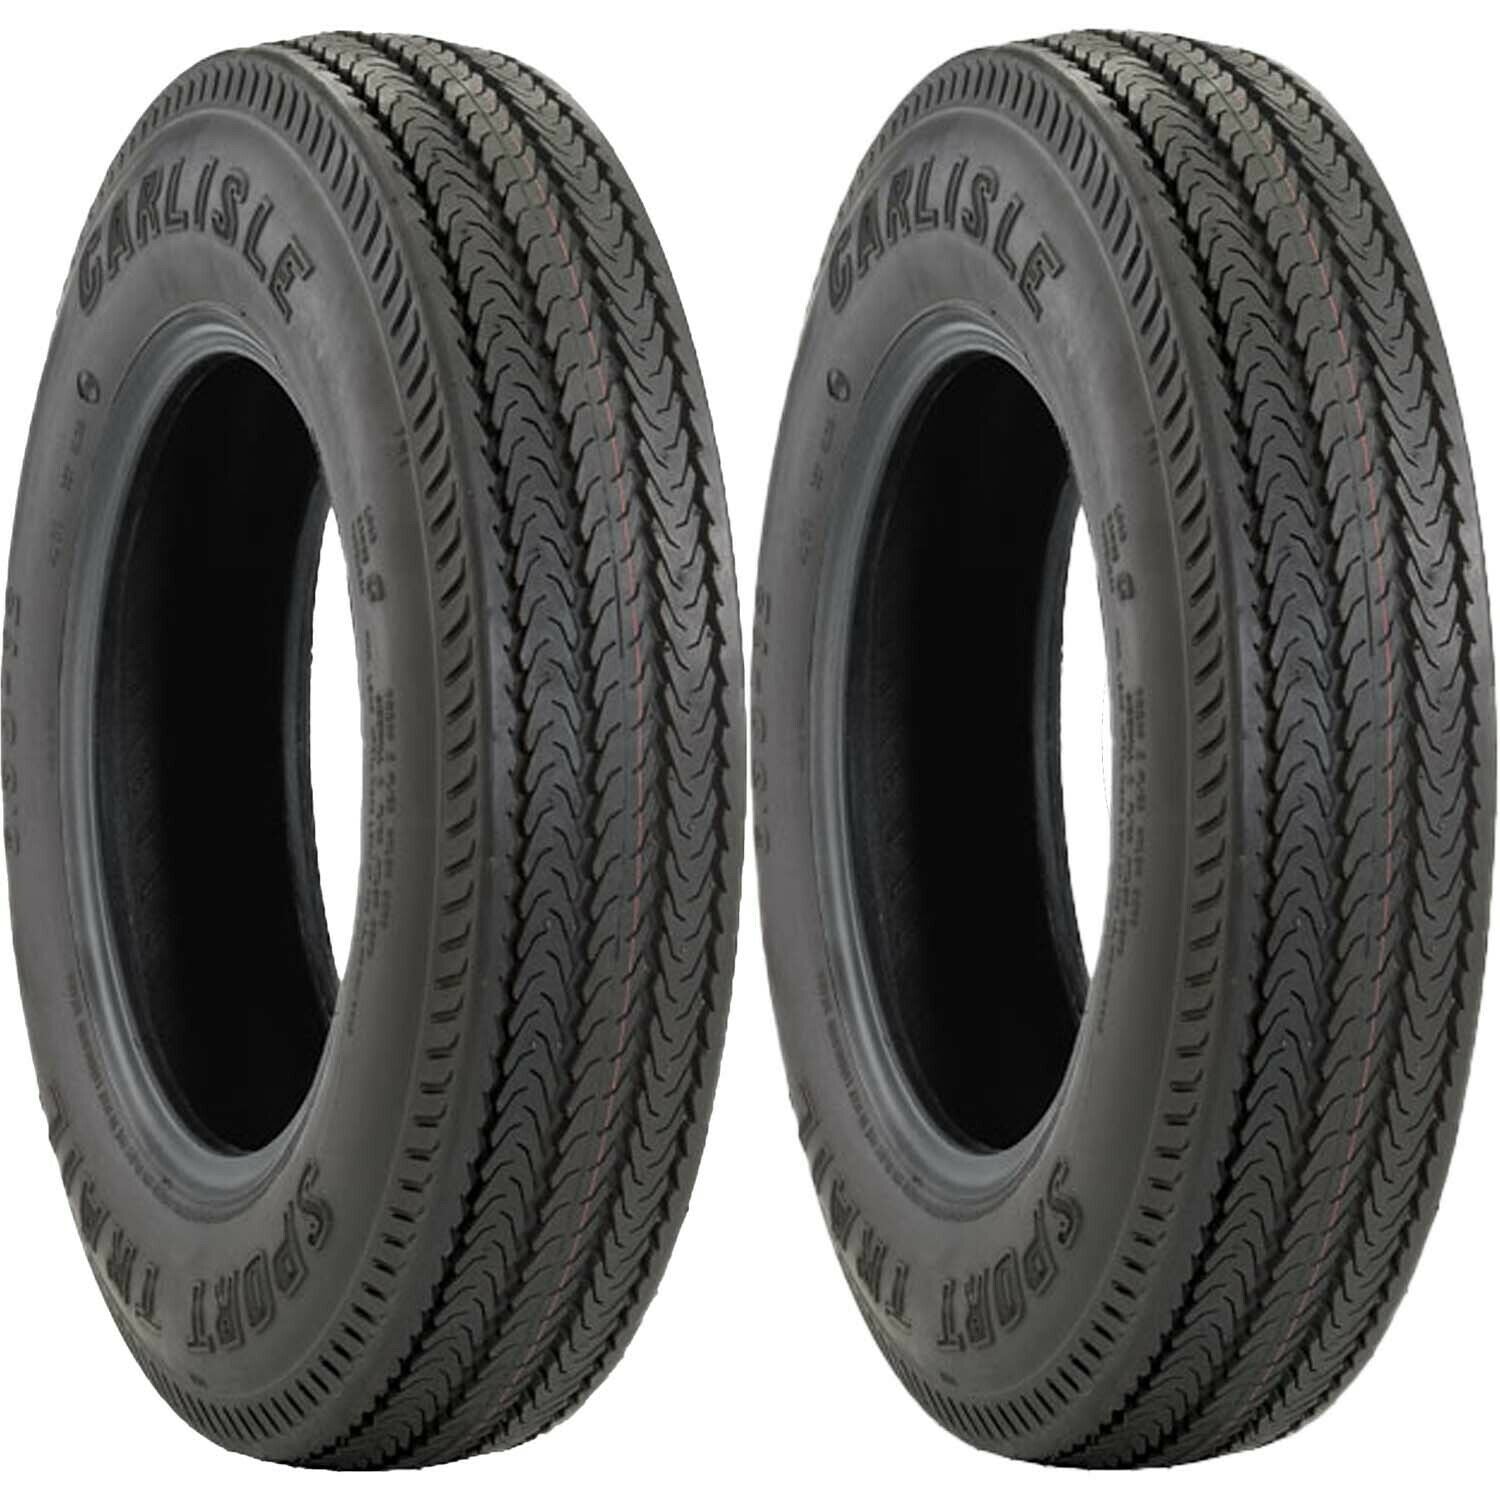 Carlisle Sport Trail Trailer Tire LRB 4Ply 4.80-8 Pack of 2